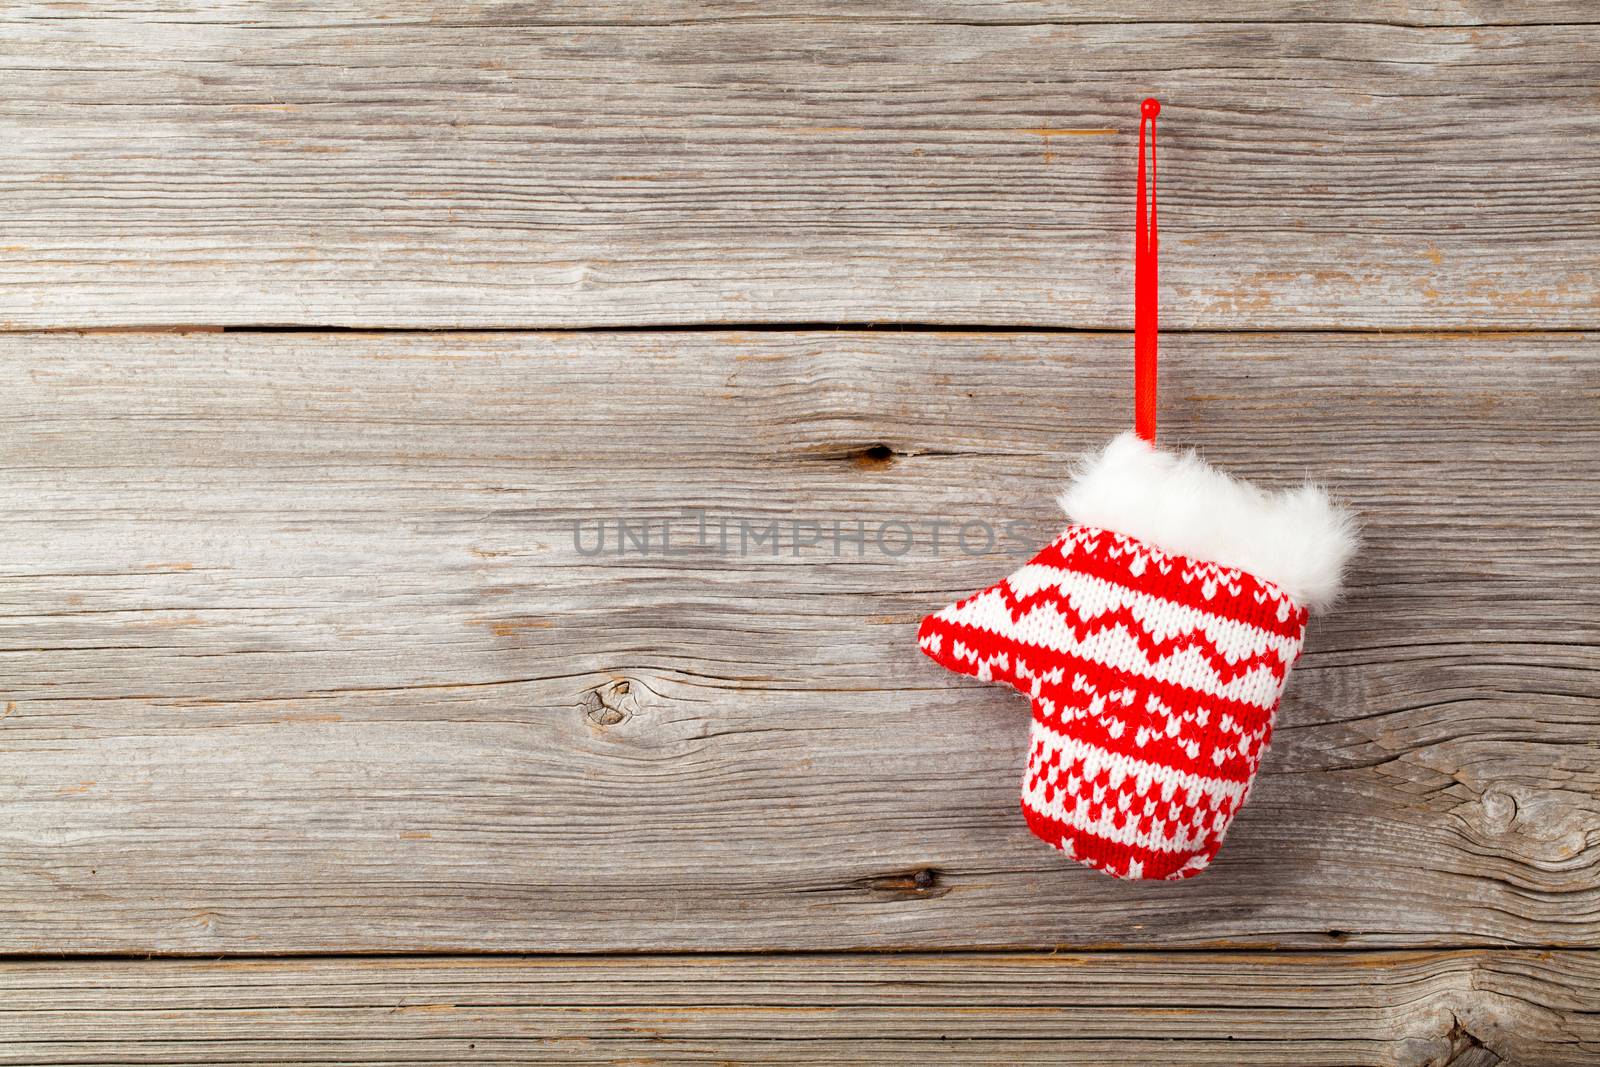 Red mitten on wooden background by motorolka